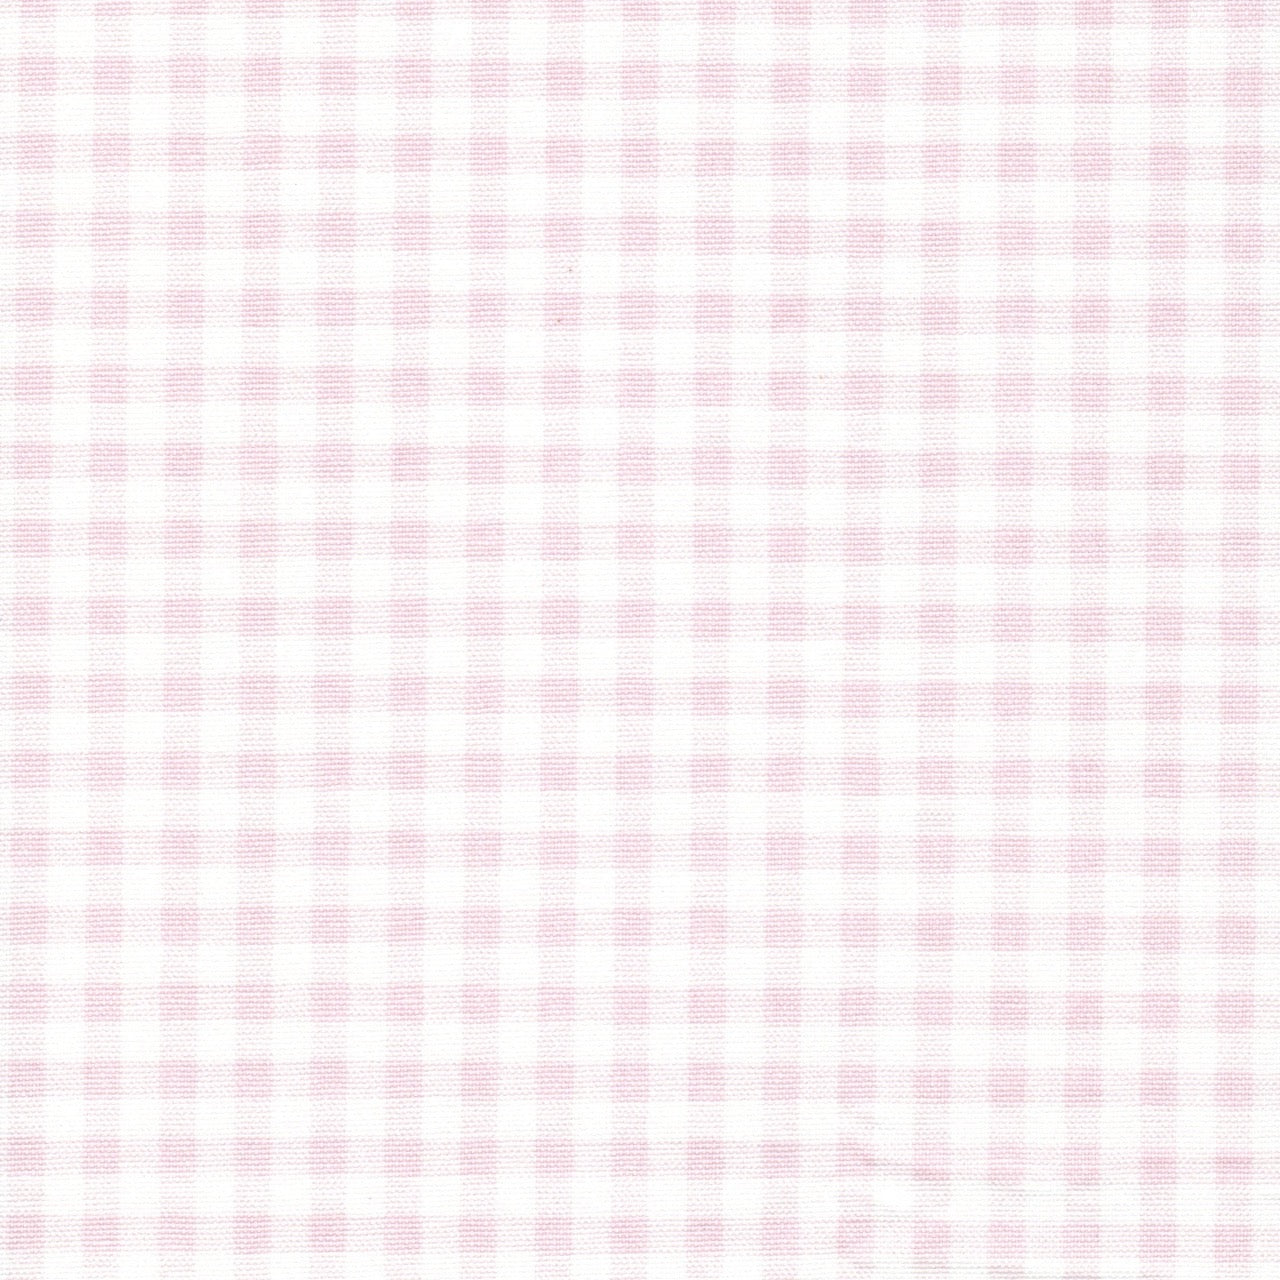 Tailored Bedskirt in Bella Pink Large Gingham Check on White